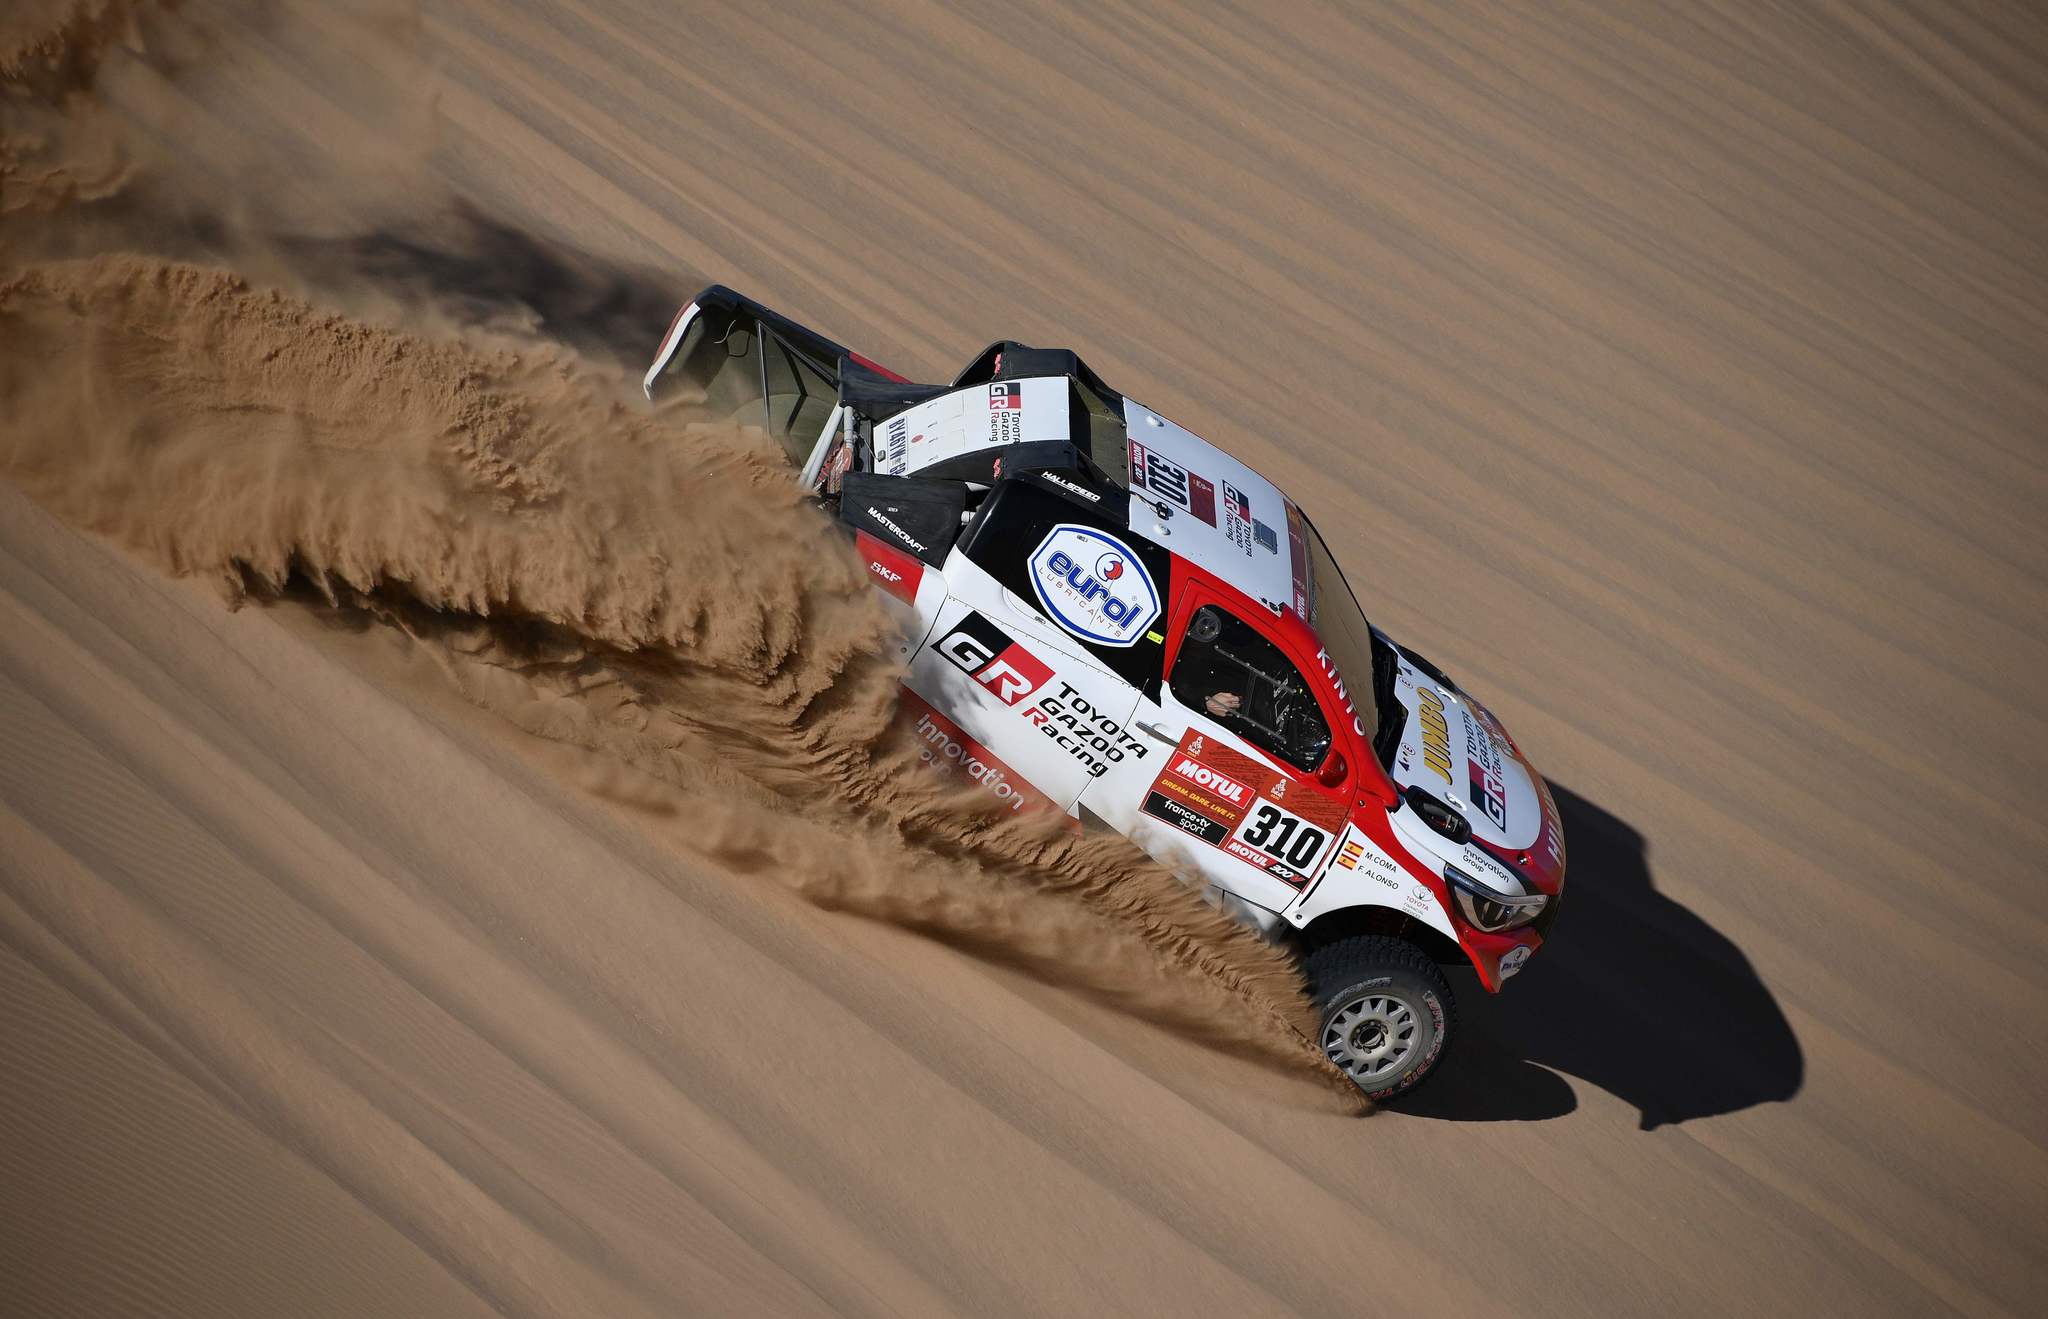 Toyotas Hilux Gazoo racing driver Frenando <HIT>Alonso</HIT> of Spain and co-driver Marc Coma of Spain compete during the Stage 1 of the Dakar 2020 between Jeddah and Al Wajh, Saudi Arabia, on January 5, 2020. (Photo by FRANCK FIFE / AFP)